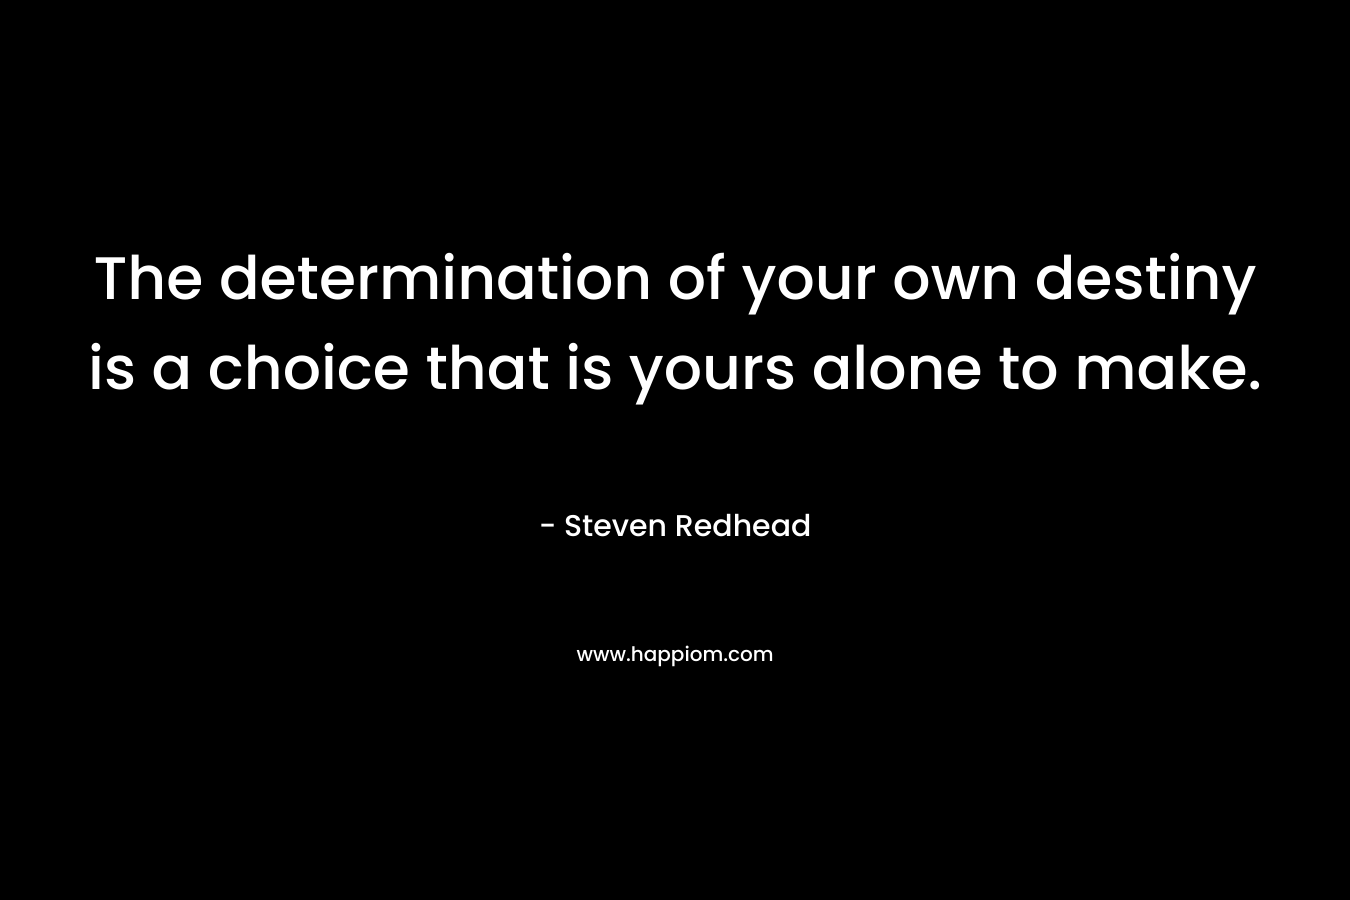 The determination of your own destiny is a choice that is yours alone to make.